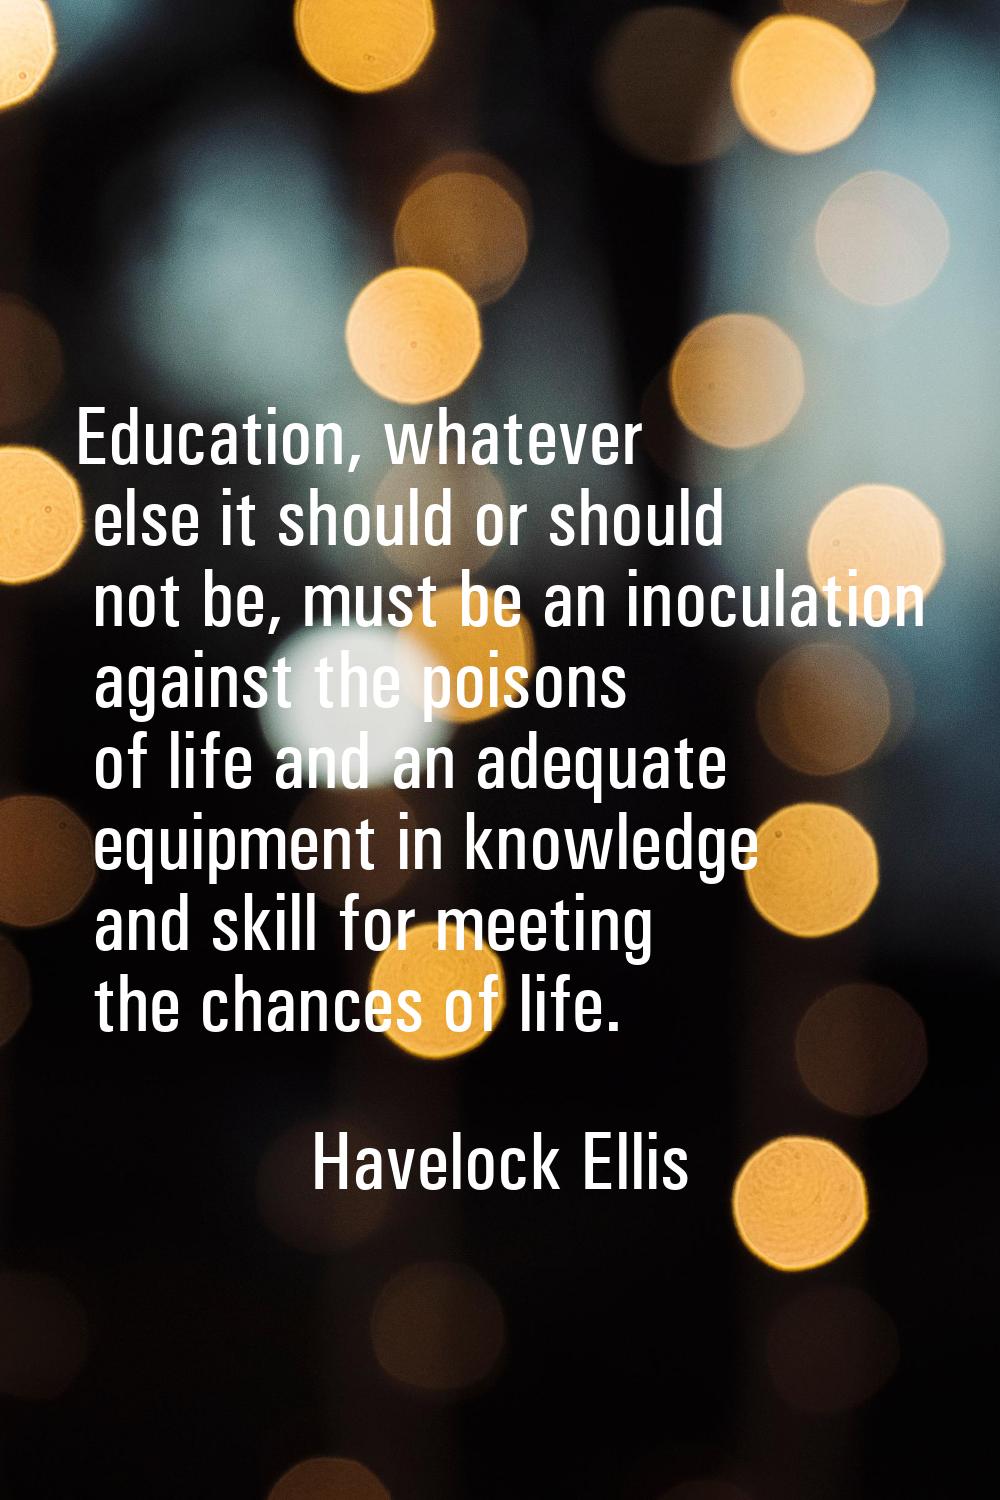 Education, whatever else it should or should not be, must be an inoculation against the poisons of 